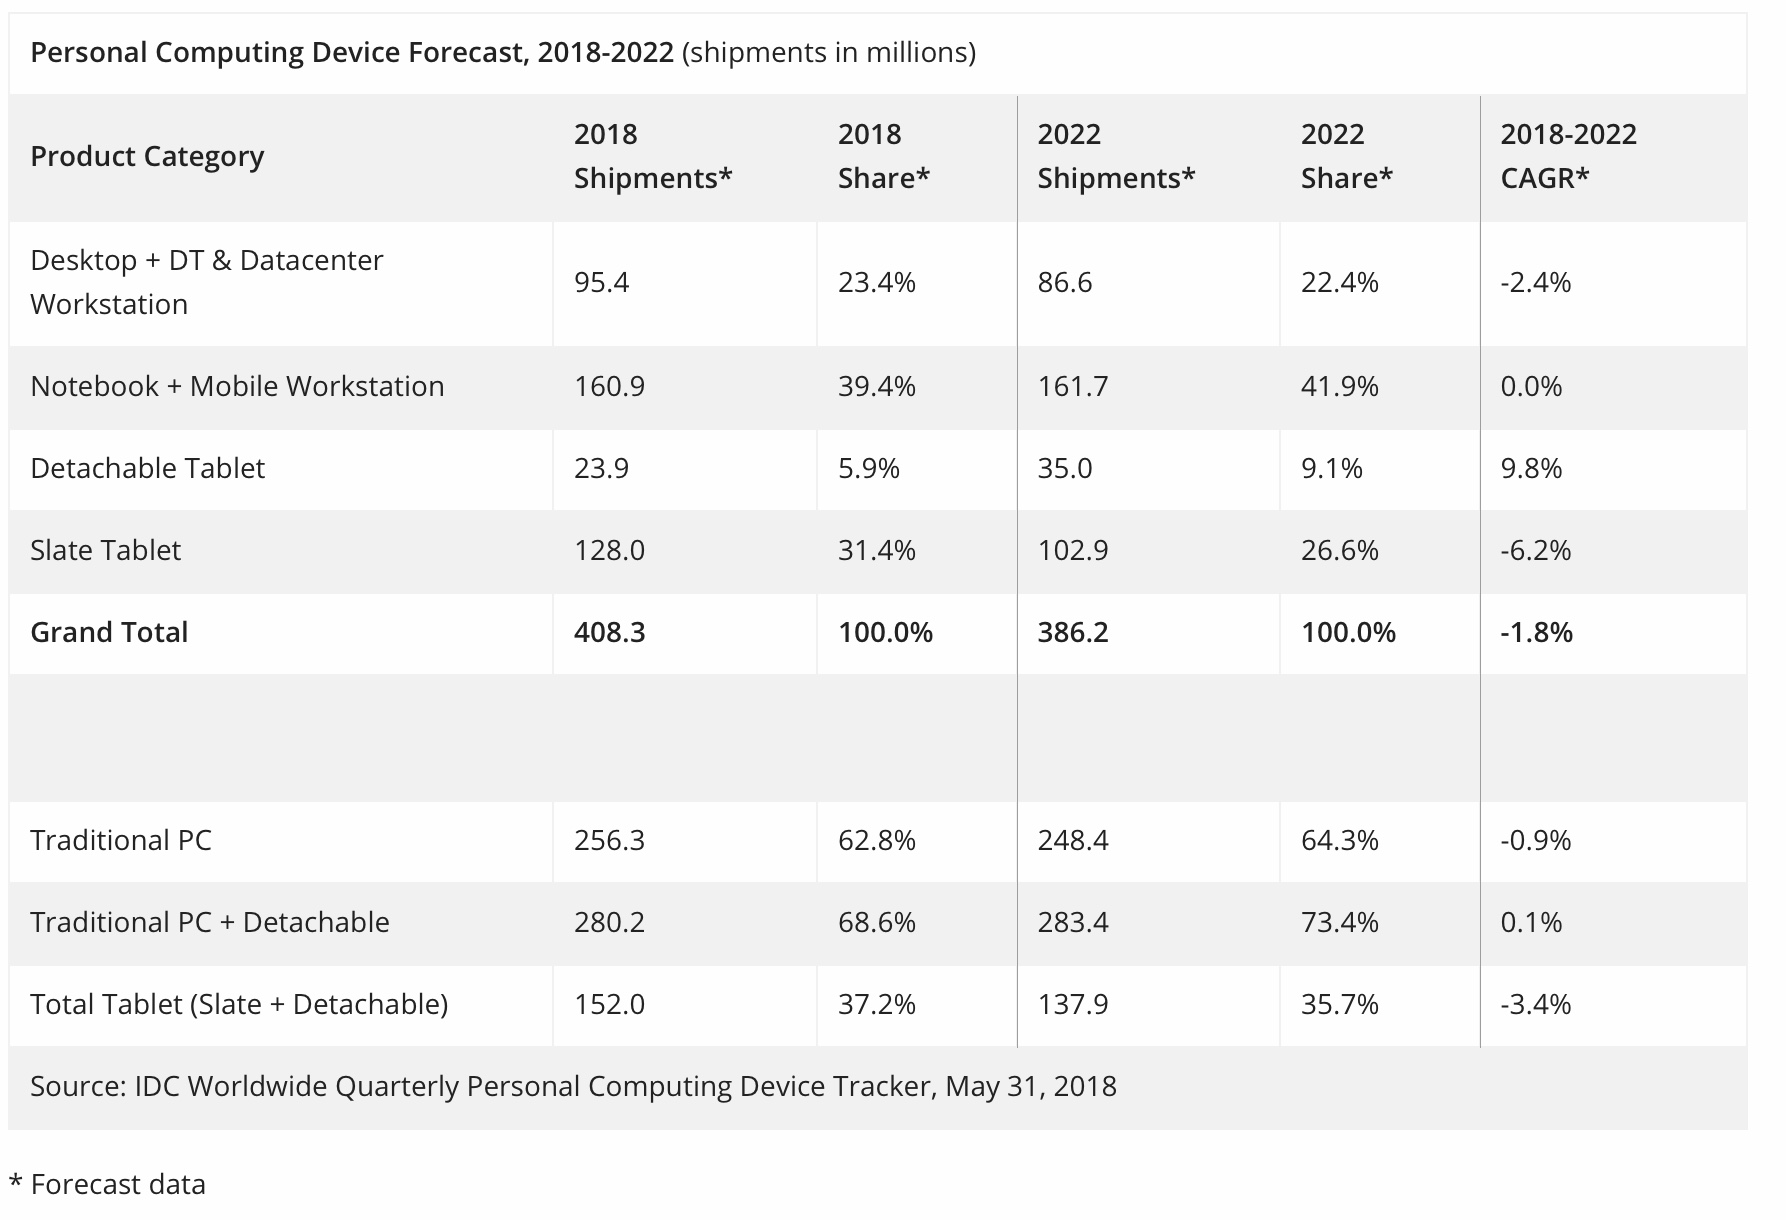 Notebooks, detachable tablets show some positive signs of growth